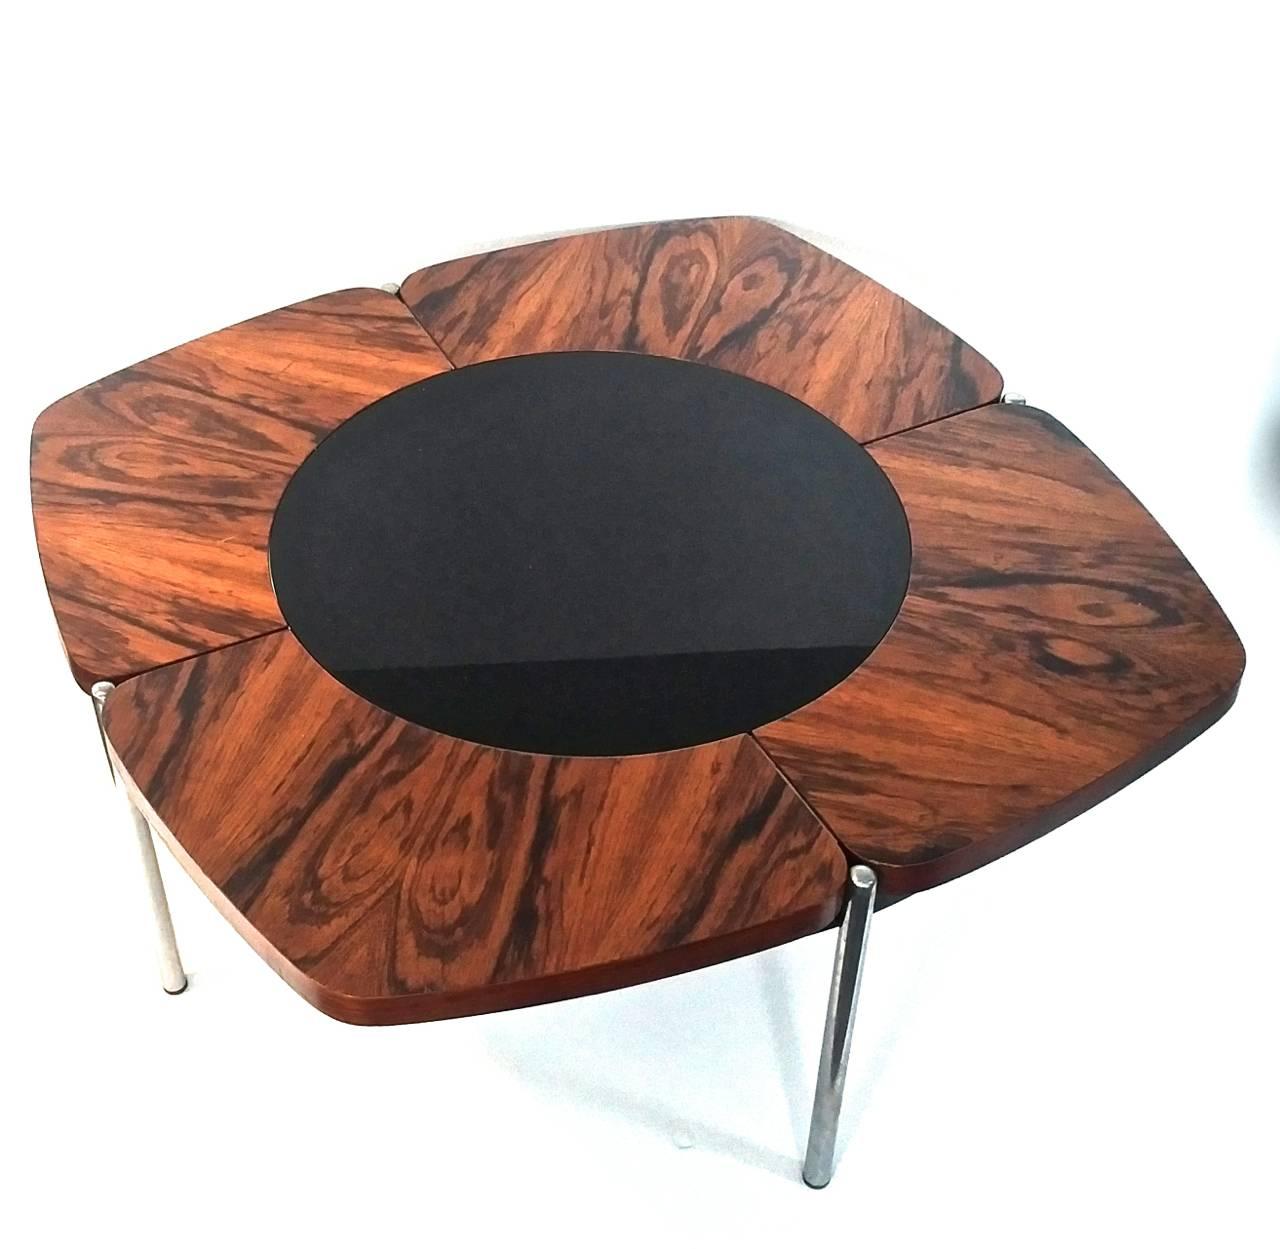 A Mid-Century coffee table with four sections forming a flower shape with a black glass center. Rosewood veneer on solid teak and a metal ring for support. The table stands on four chromed steel legs.